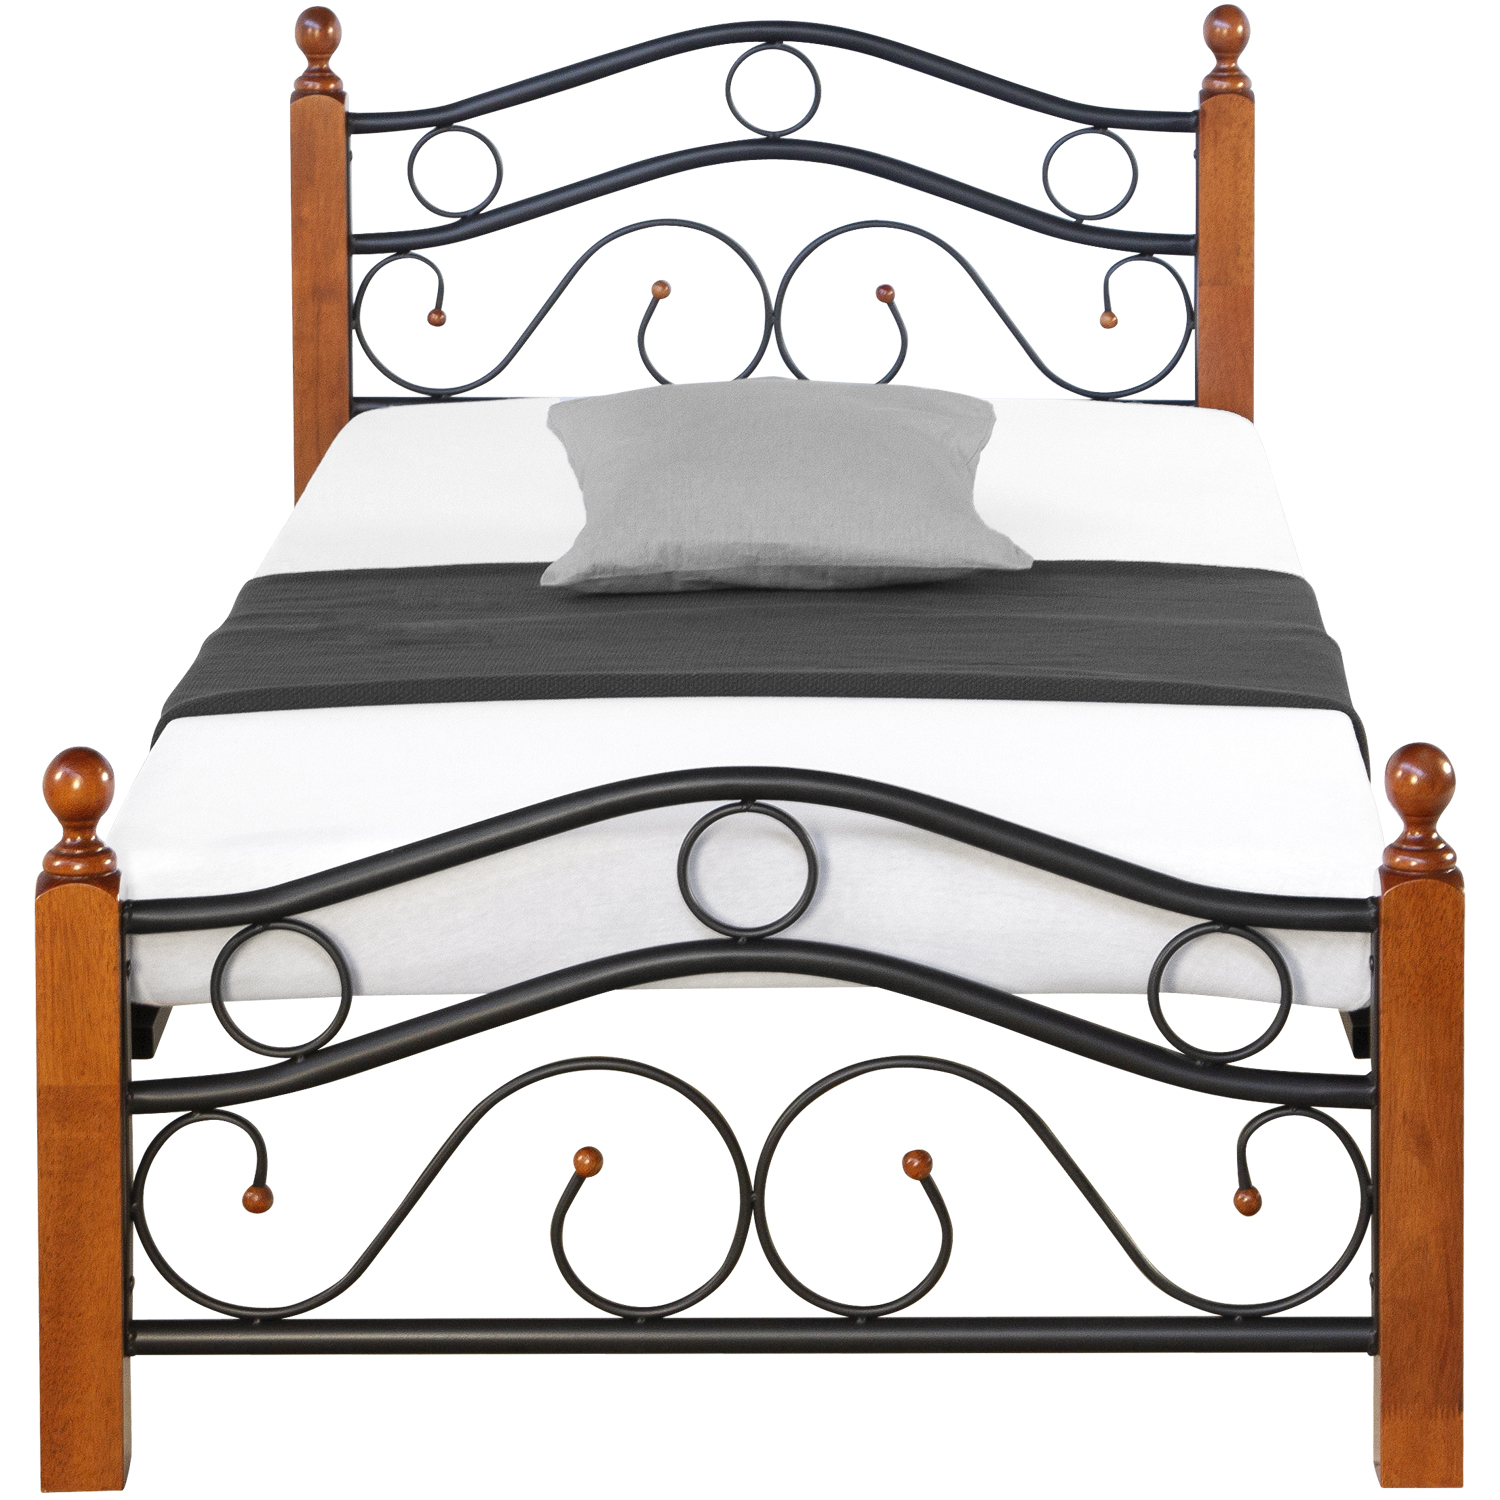 Metal Bed with Mattress Slatted Frame 90x200 cm Bedstead Black Brown Wood Single Daybed